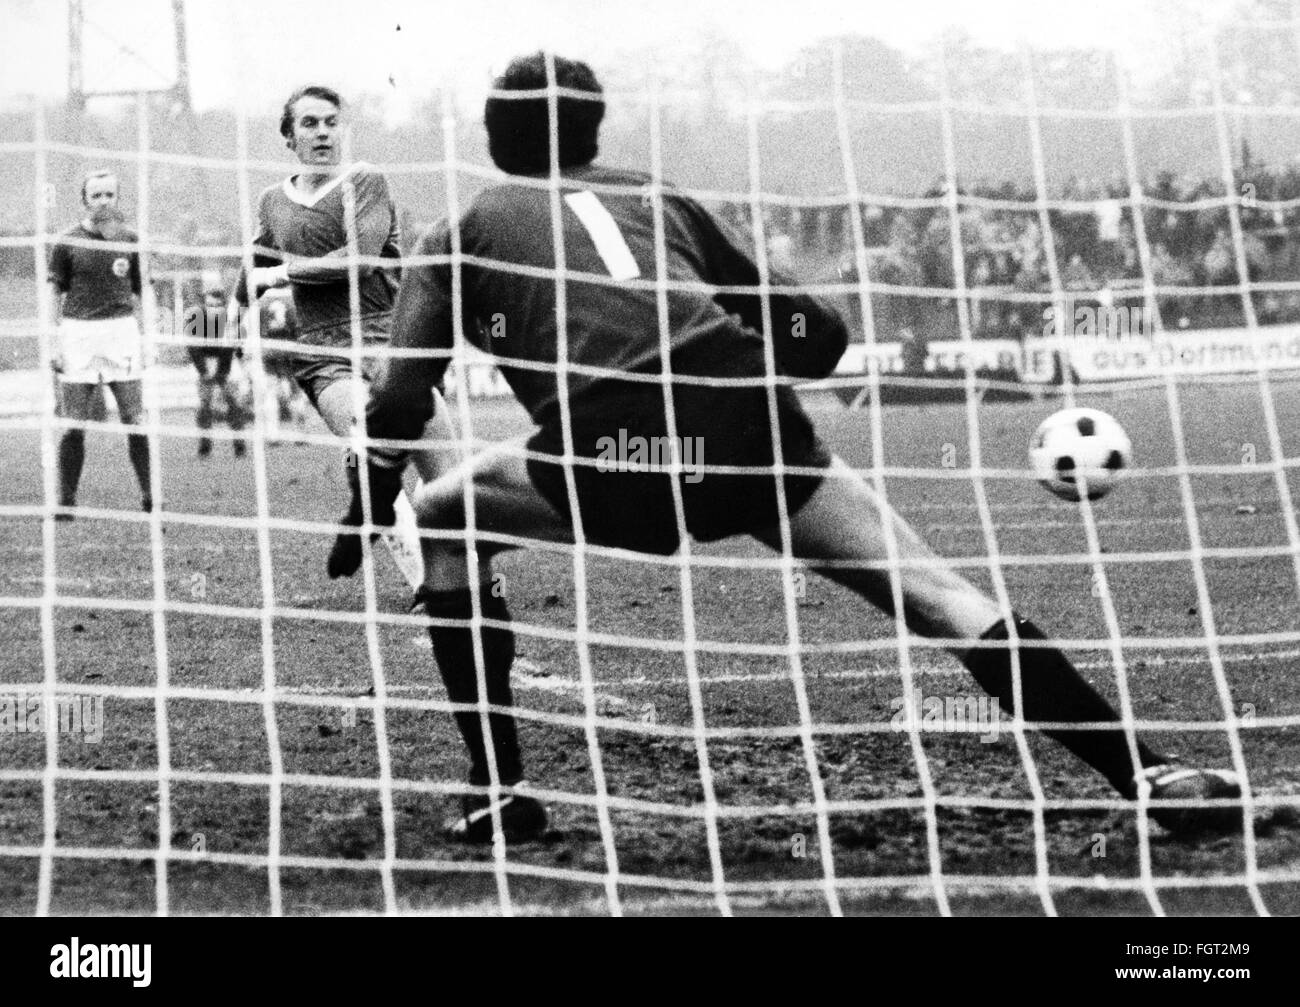 sports,football,games,Germany,national league,season 1970 / 1971,13th match day,game Rot-Weiss Oberhausen versus Kickers Offenbach(2:2),Niederrheinstadion,31.10.1970,goal to the 2:1 for Oberhausen by penalty kick of Friedhelm Kobluhm,Rot Weiss,goal keeper Karlheinz Volz,penalty shot,penalties,penalty kicks,penalty shots,nets,goal net,football match,soccer match,football matches,footballer,footballers,kicker,football player,football players,action,act,actions,acts,ball,playing,play,football stadium,soccer stadium,football sta,Additional-Rights-Clearences-Not Available Stock Photo